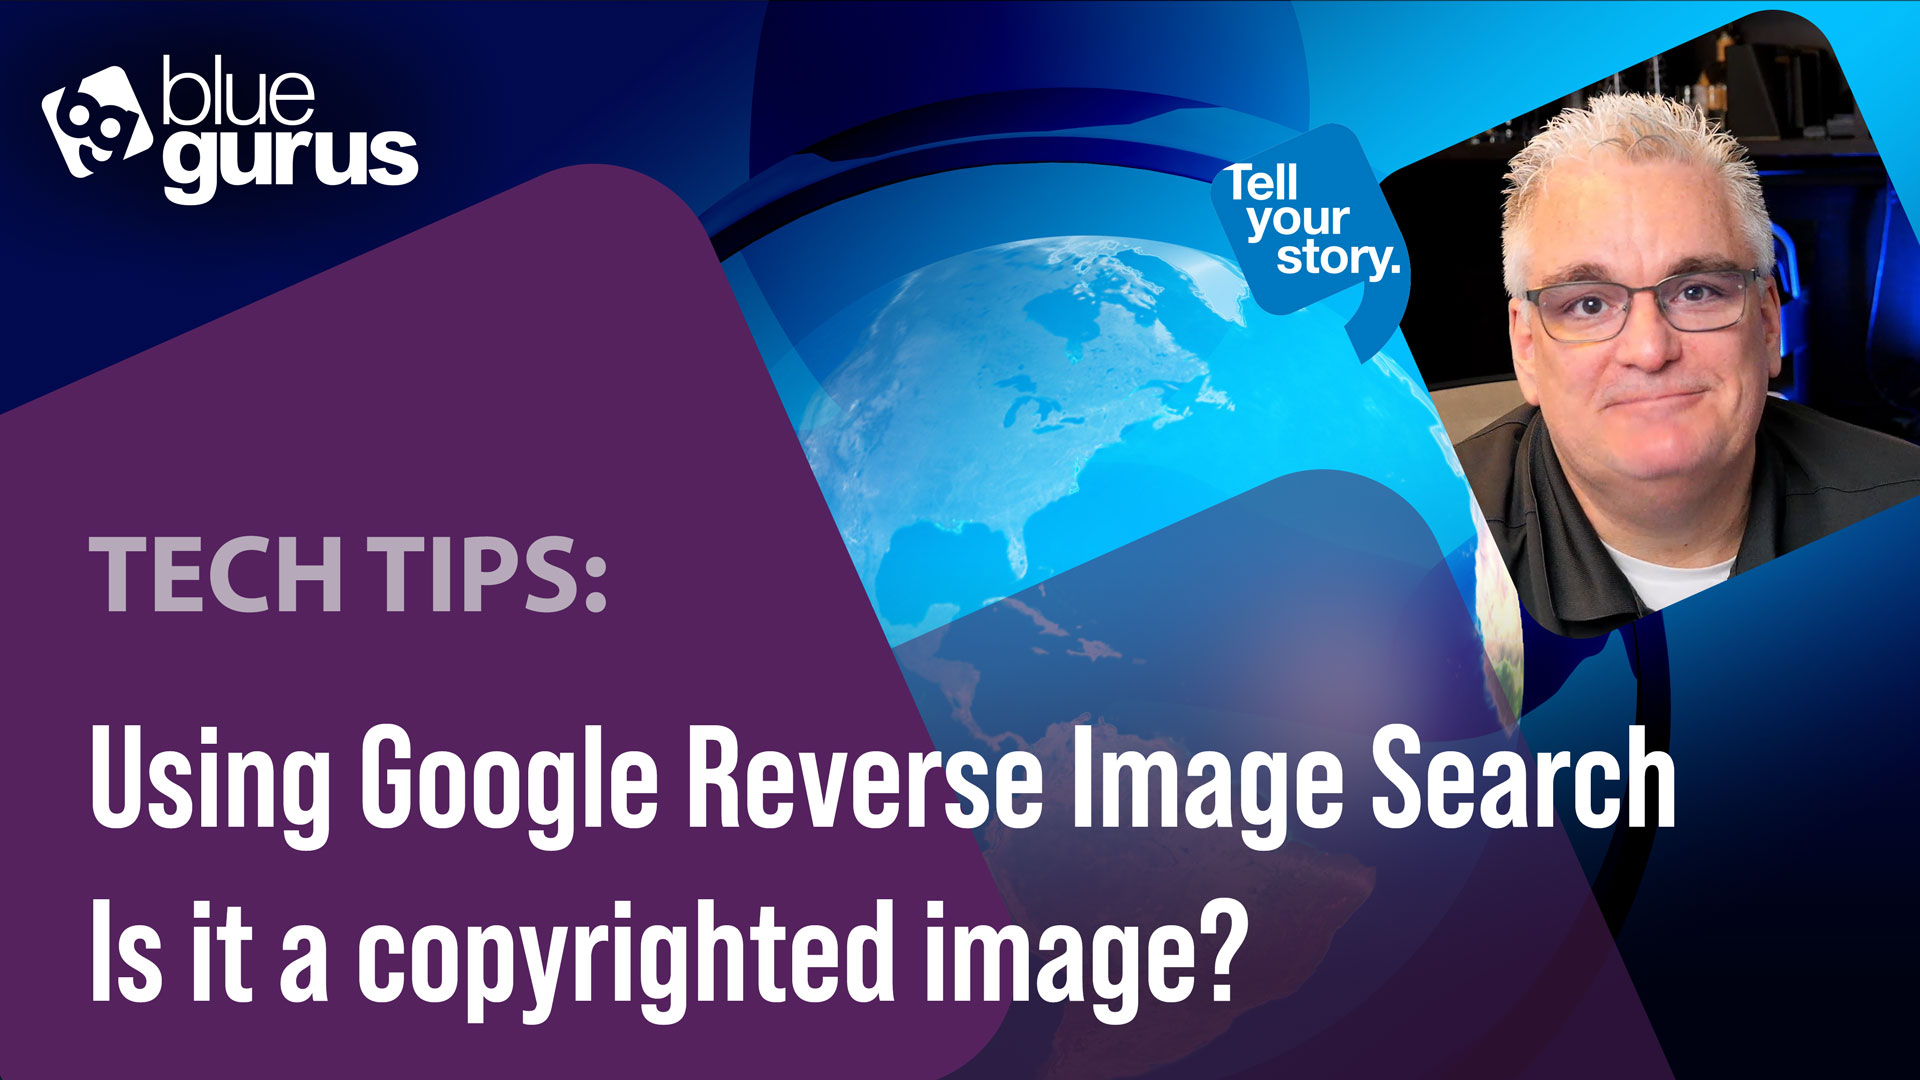 Tech Tips: Using Google Reverse Image Search - Is it a copyrighted image?